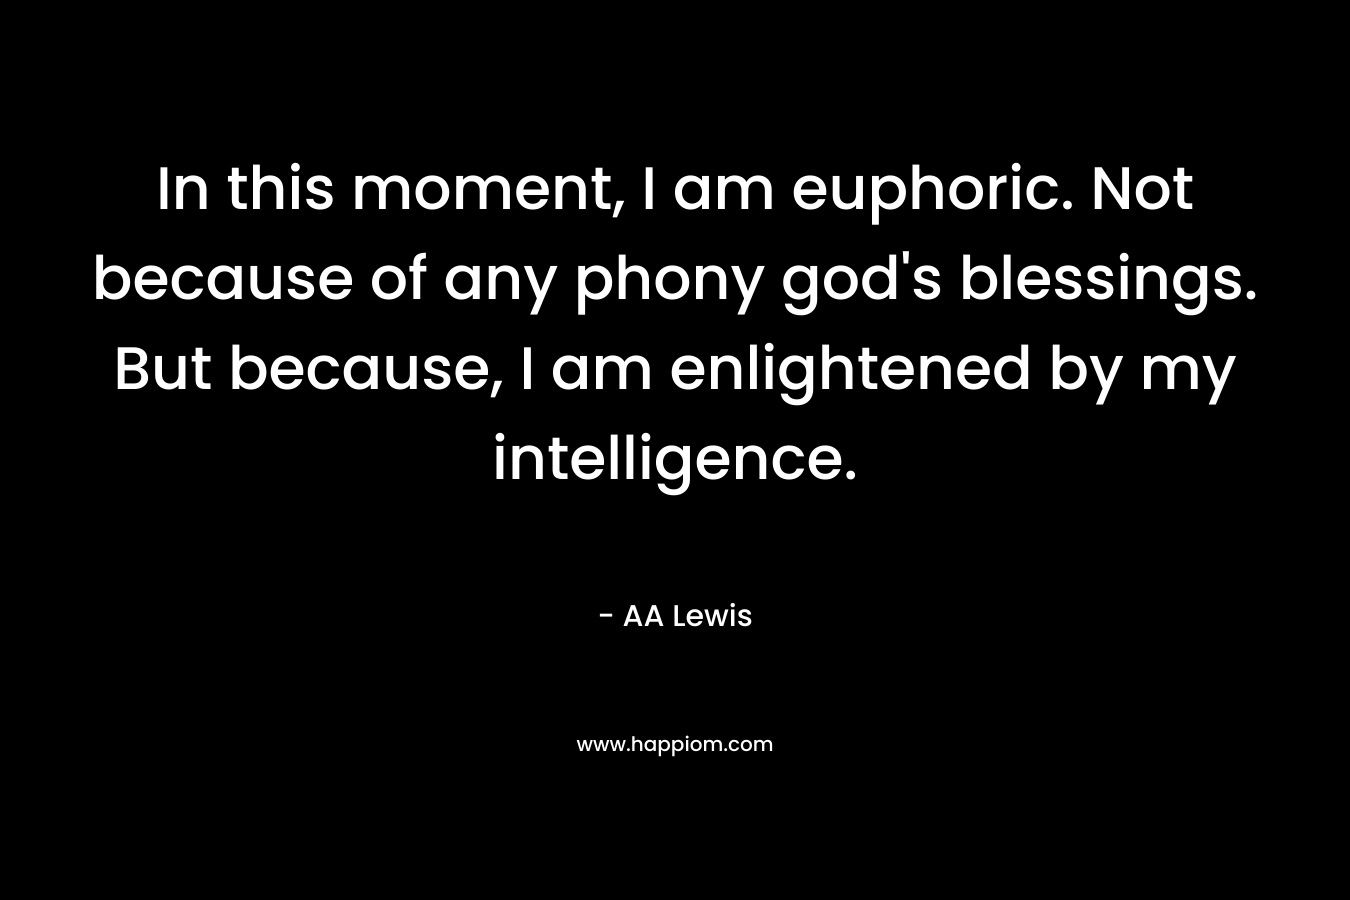 In this moment, I am euphoric. Not because of any phony god’s blessings. But because, I am enlightened by my intelligence. – AA Lewis